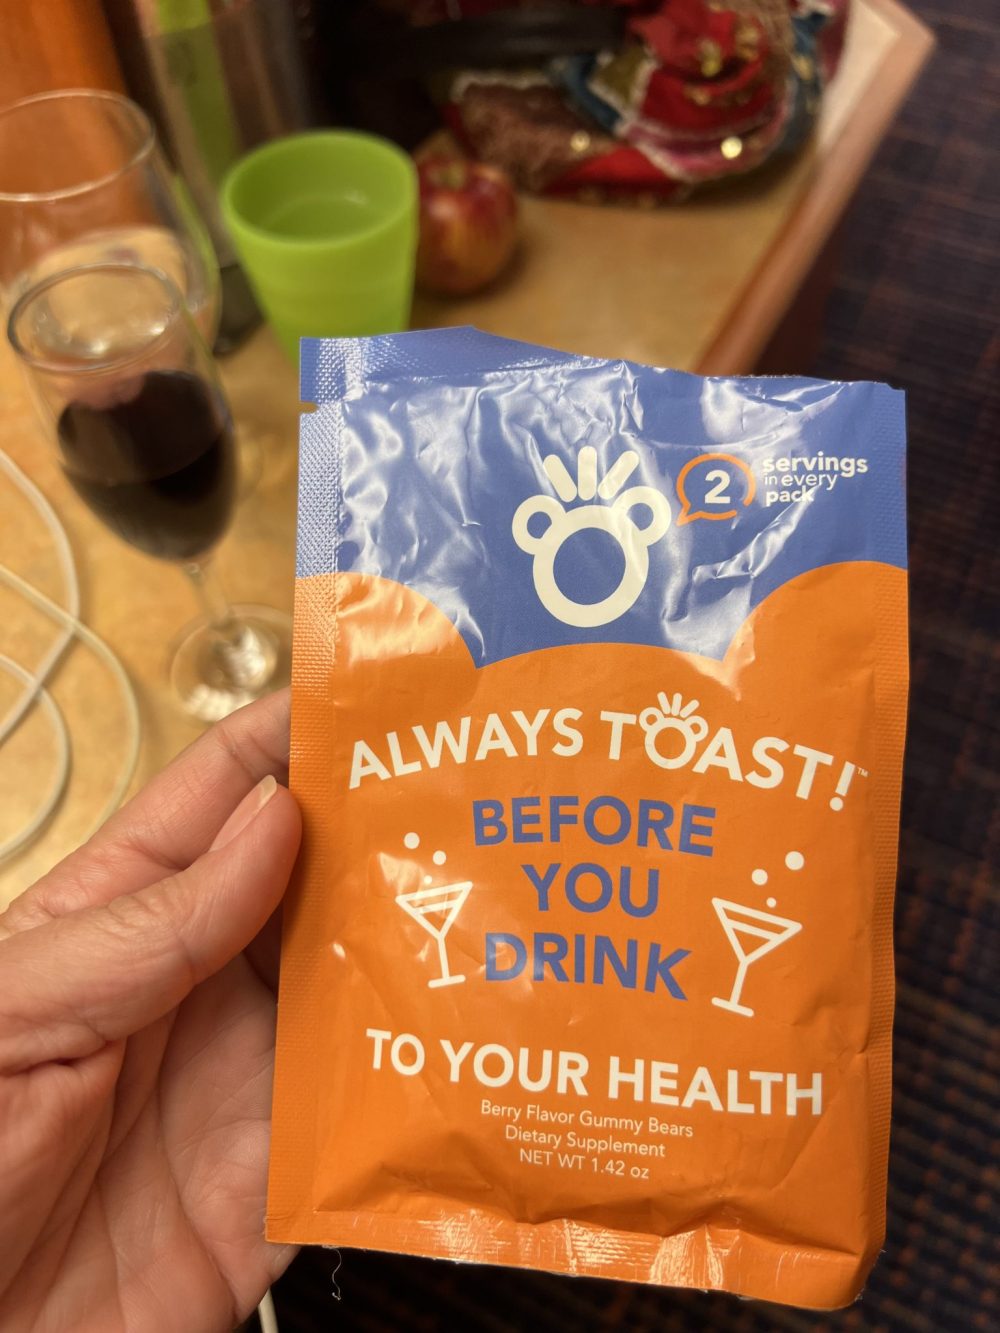 Always TOAST Before You Drink While Traveling!